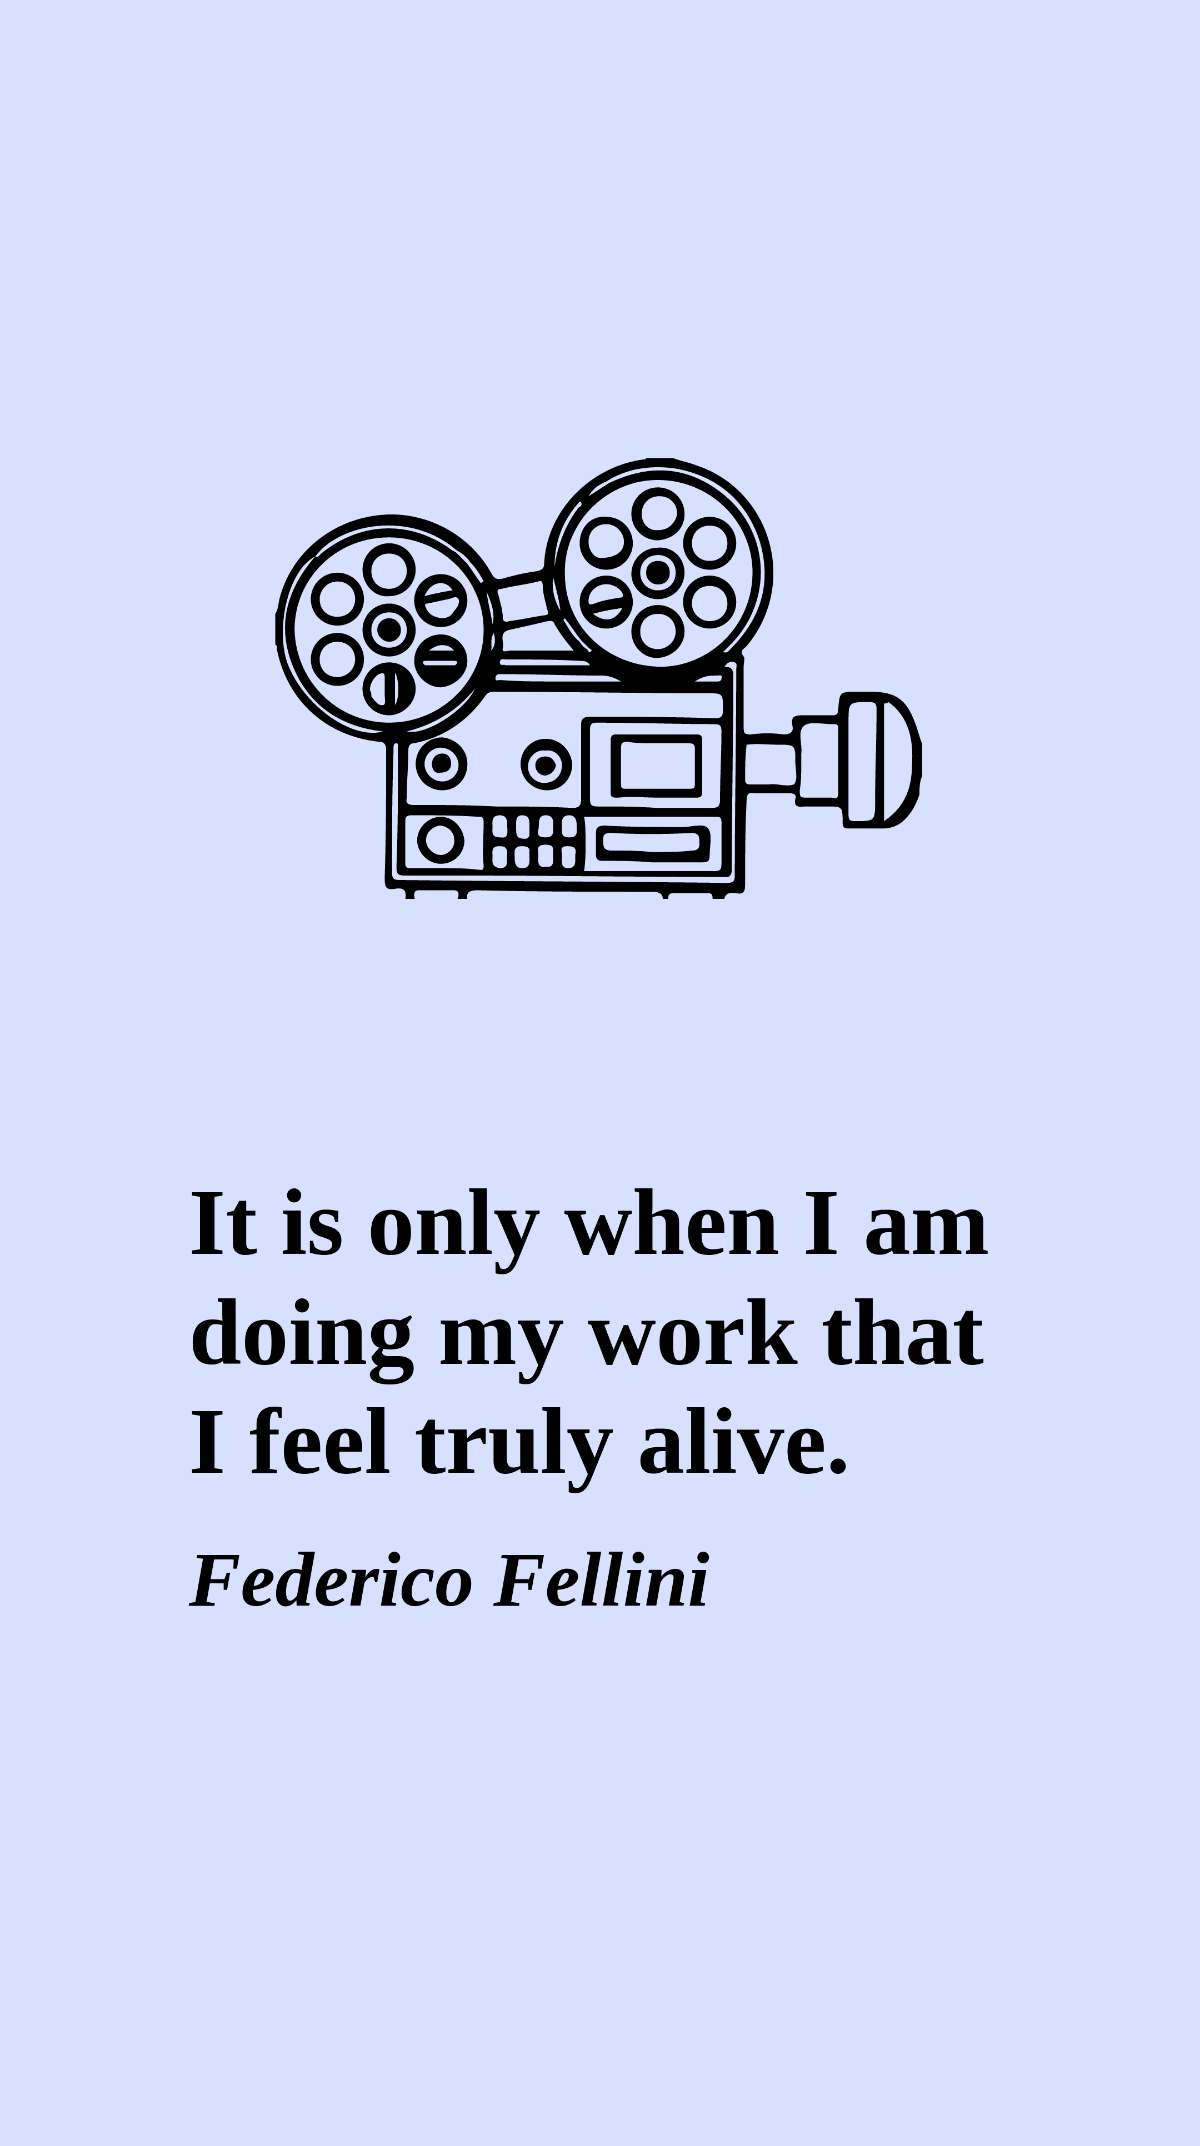 Federico Fellini - It is only when I am doing my work that I feel truly alive. Template